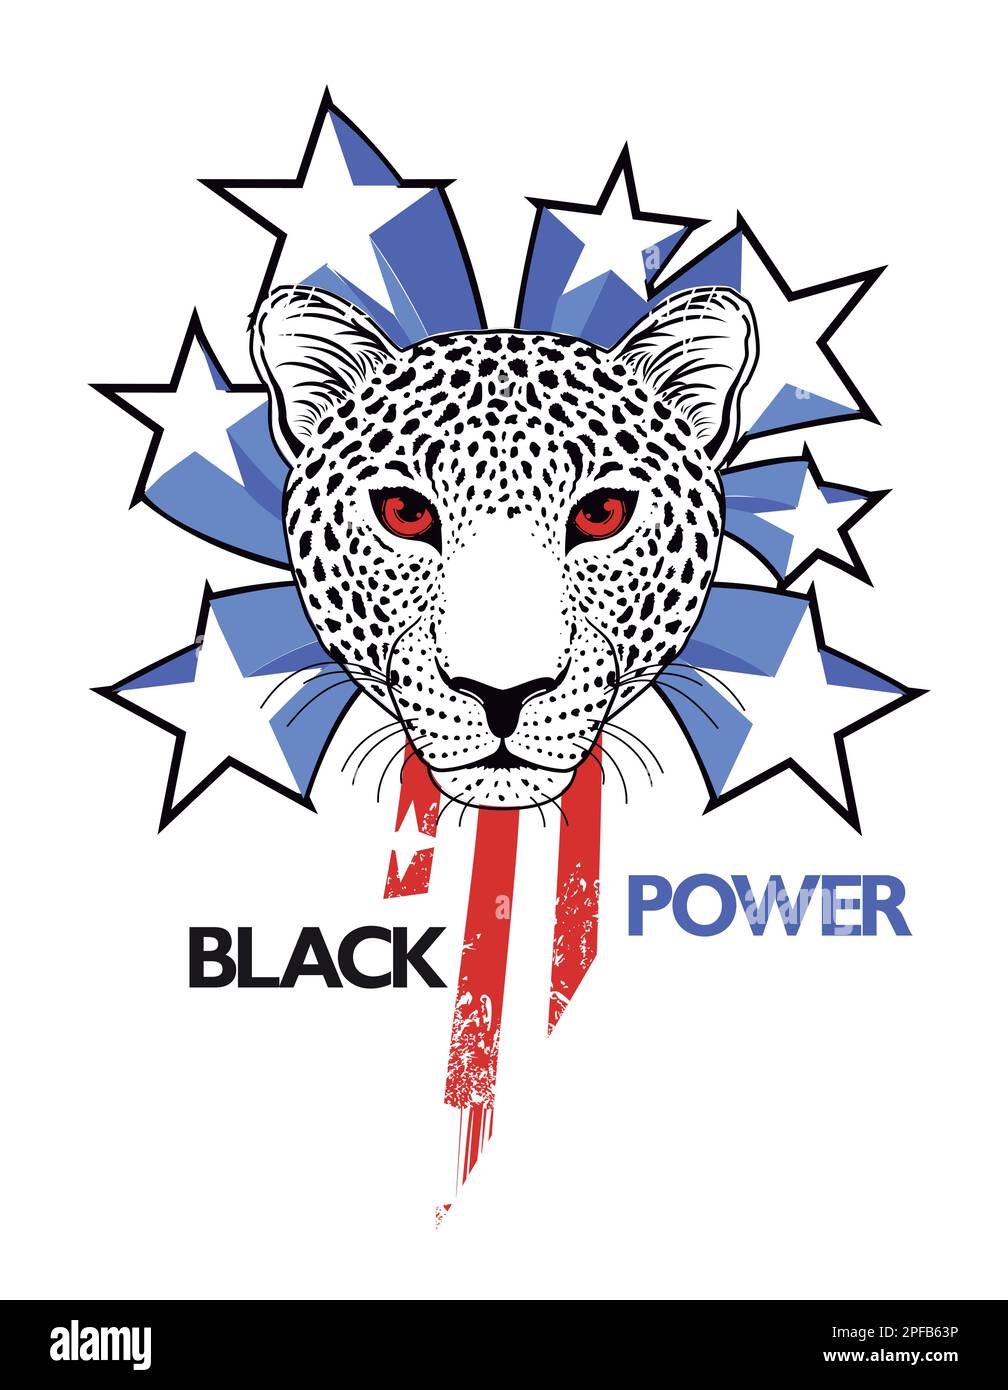 blackpower. design for t-shirt of a leopard face with stars and vertical red stripes. Vector illustration for afro history month Stock Vector